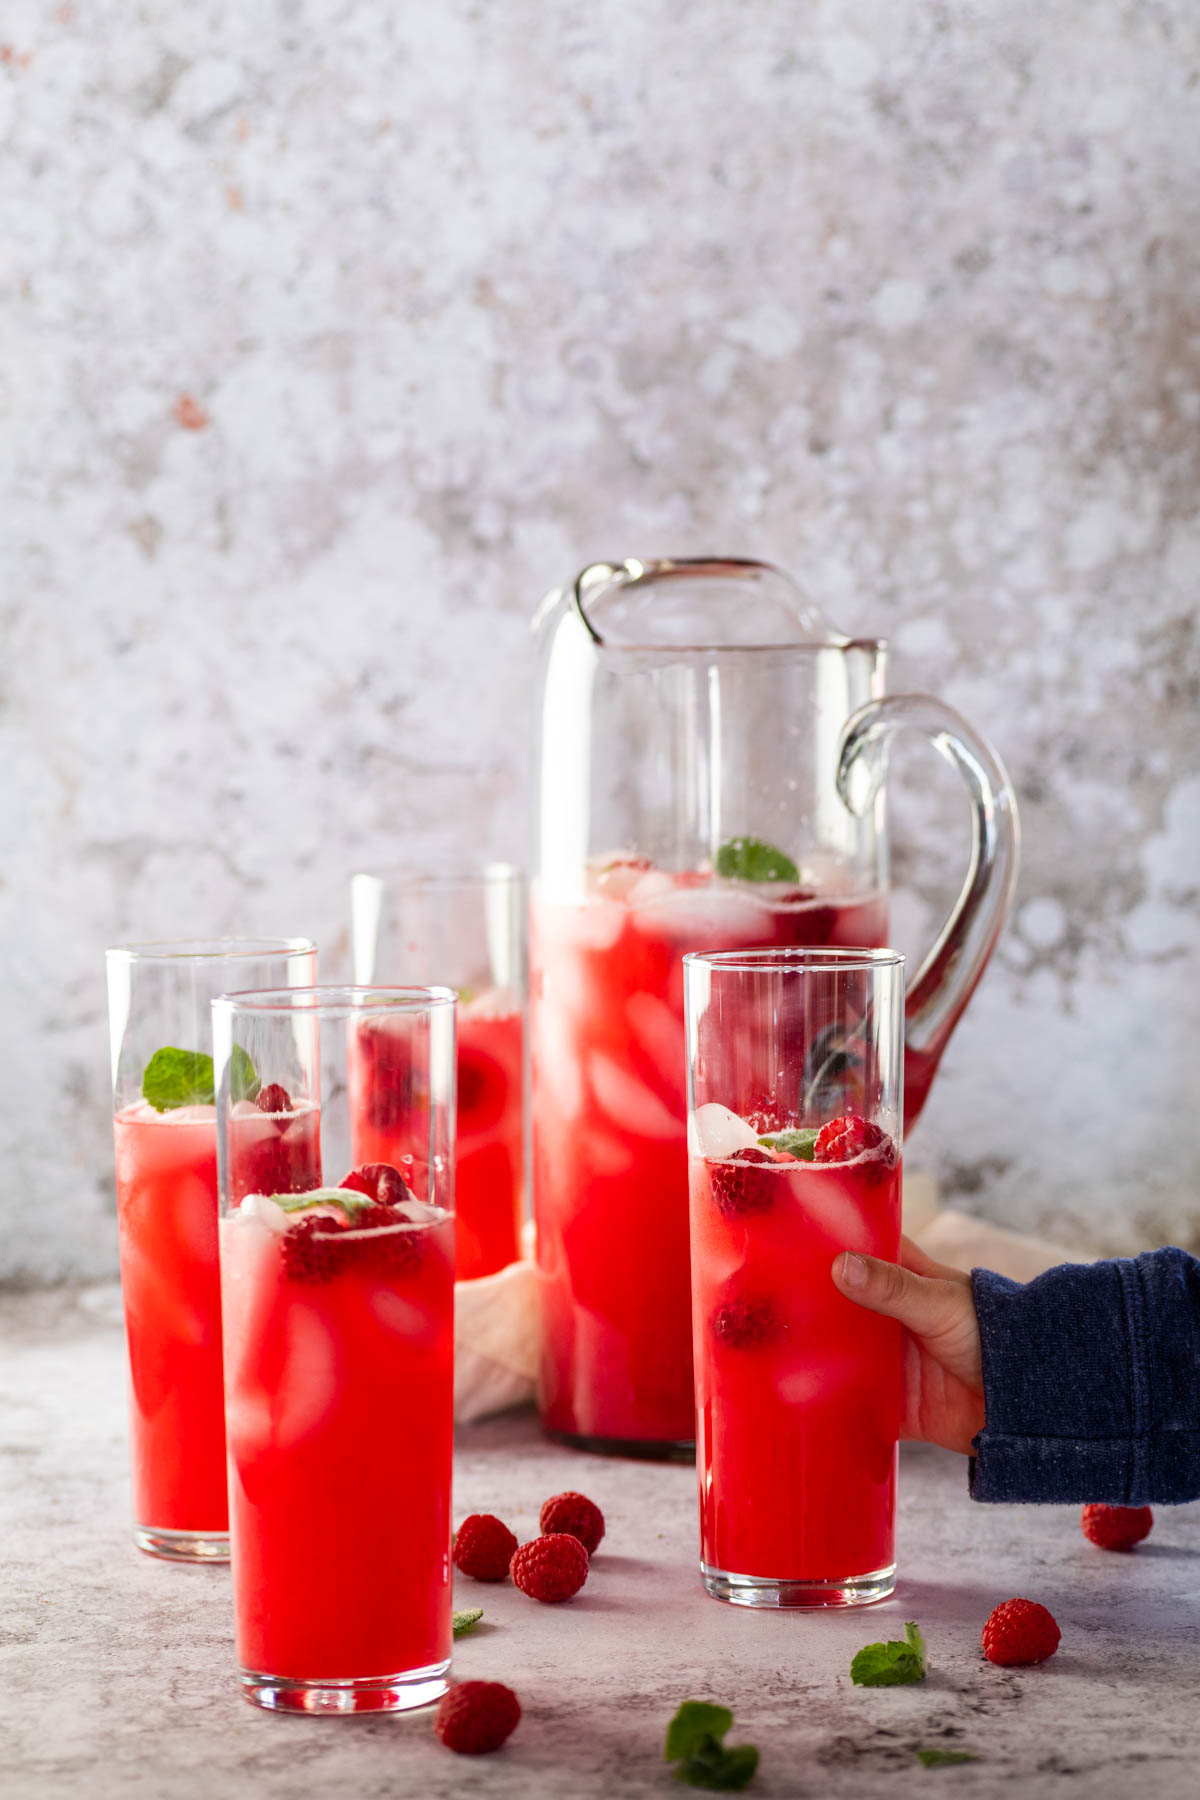 Sugar-free Raspberry Limeade in glasses and pitcher. One glass of raspberry limeade is holding.